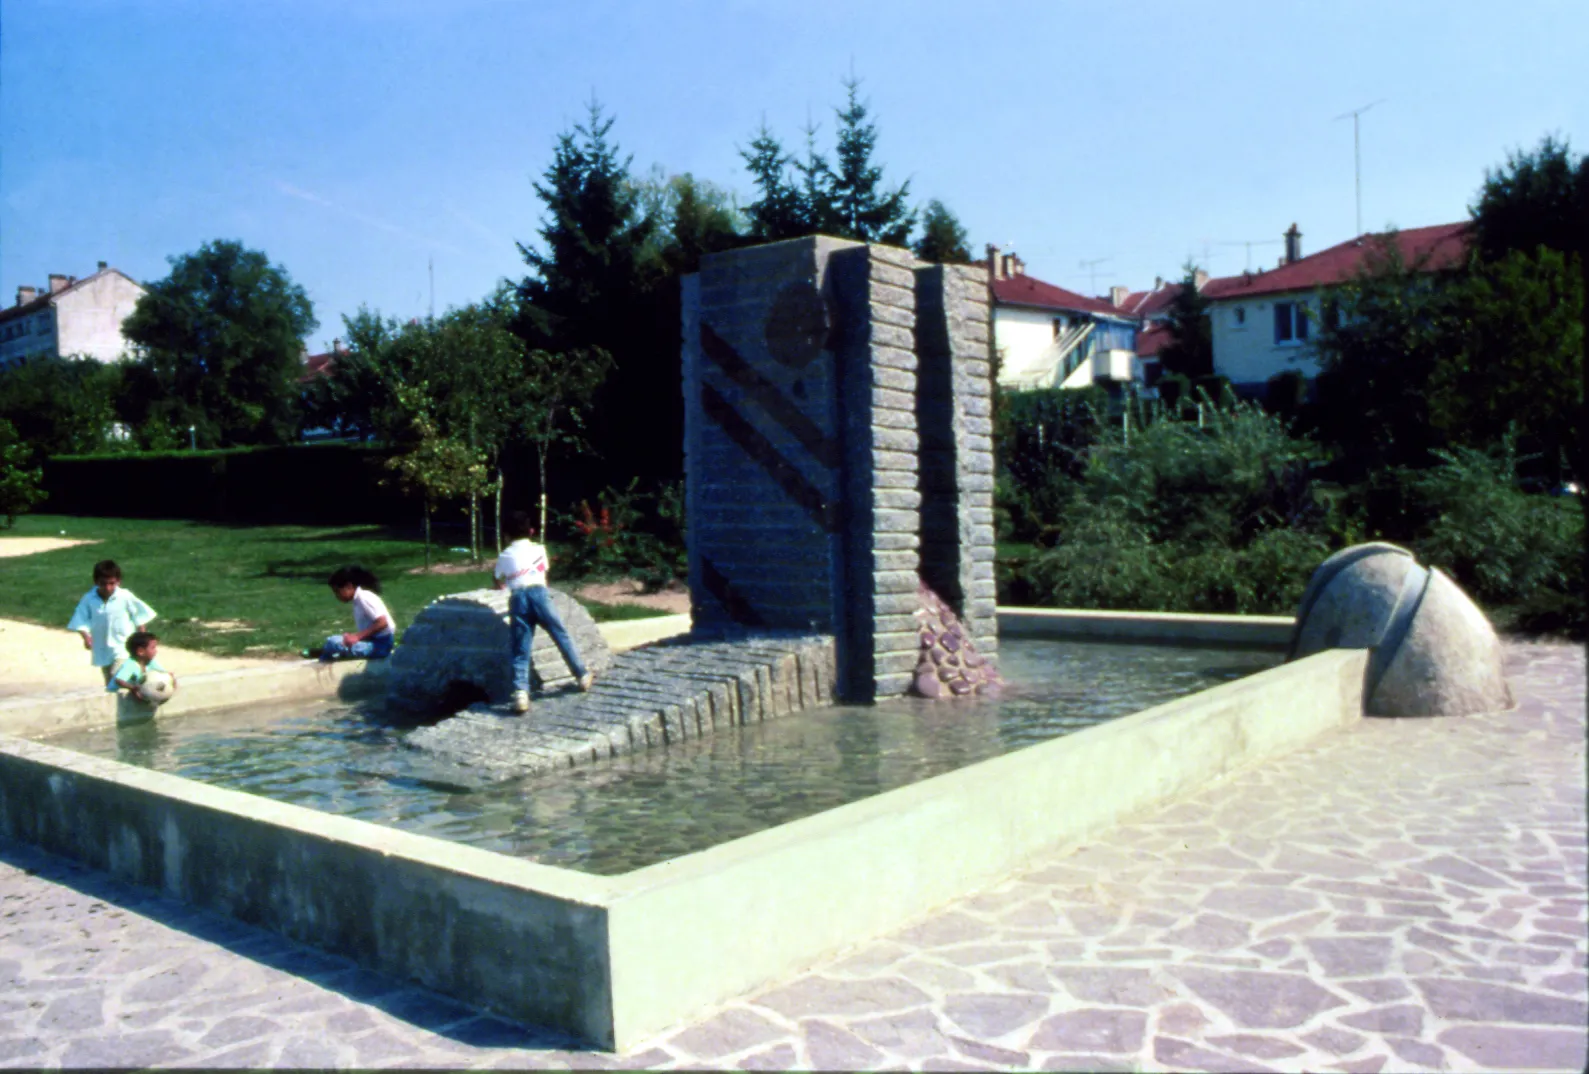 Photo showing: Tetsuo Harada sculptor. Public commission, realization of “Fountain”, H 300, basins 800 x 600, made of grey granite encrusted with pink granite, pebbles. Totems H 300, placed in the City neighborhood des Vertes Voyes in Sainte Menehould, Champagne region. Organized by the Ministry of Education and the City of Sainte Menehould. The fountain will create the link between the old and new city neighborhood. The city of St. Ménéhould has a remarkable architectural know mixing brick with clear limestone. Located near the vocational school, the fountain is encrusted pink granite recalling the local style. Water flows from the top of granite columns and slid into the basin. Very shallow, it serves mainly to give more transparency to the work and to reflect the sky, clouds or the stars. The arrival of this sculpture has completely changed the use of this place that is now commemorative and well equipped. Competition "1%" of the Ministry of National Education and the municipality of Saint Ménéhould.